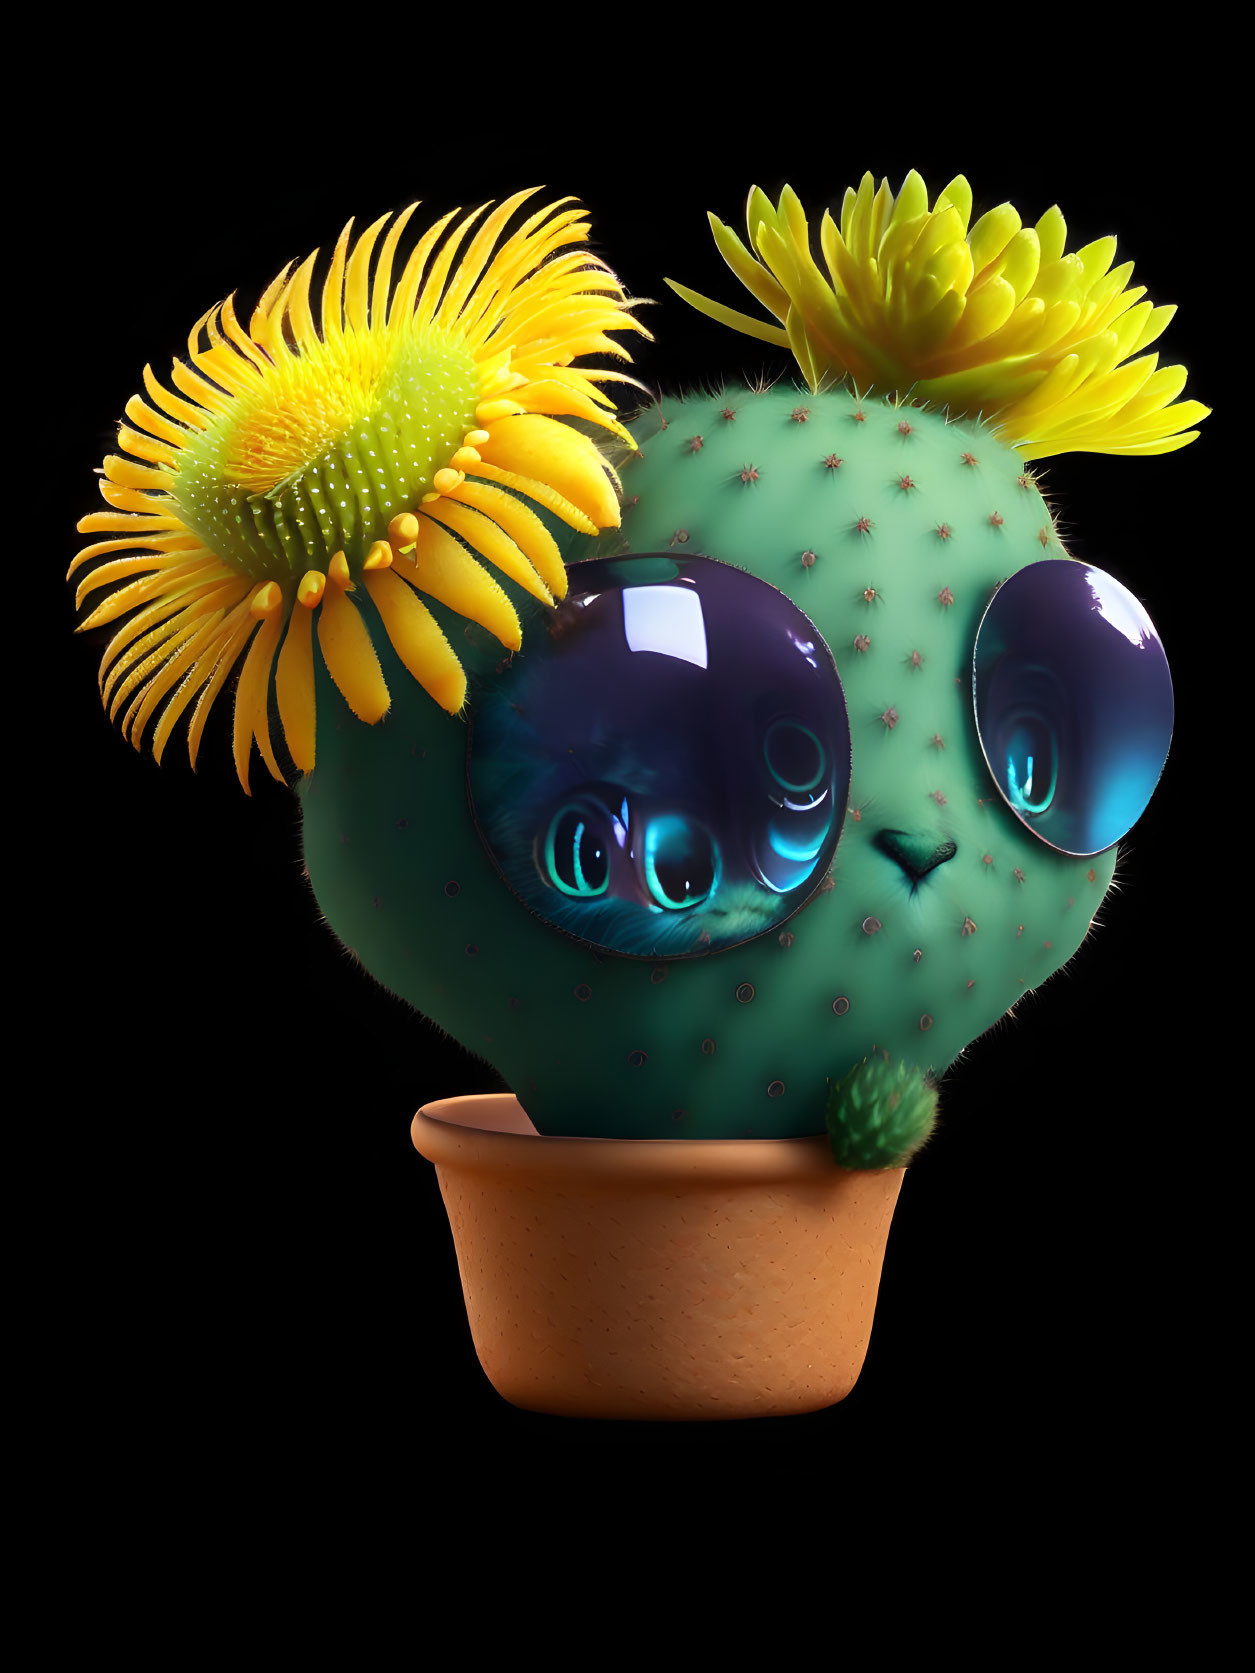 Anthropomorphic cactus with blue eyes and yellow flowers in clay pot